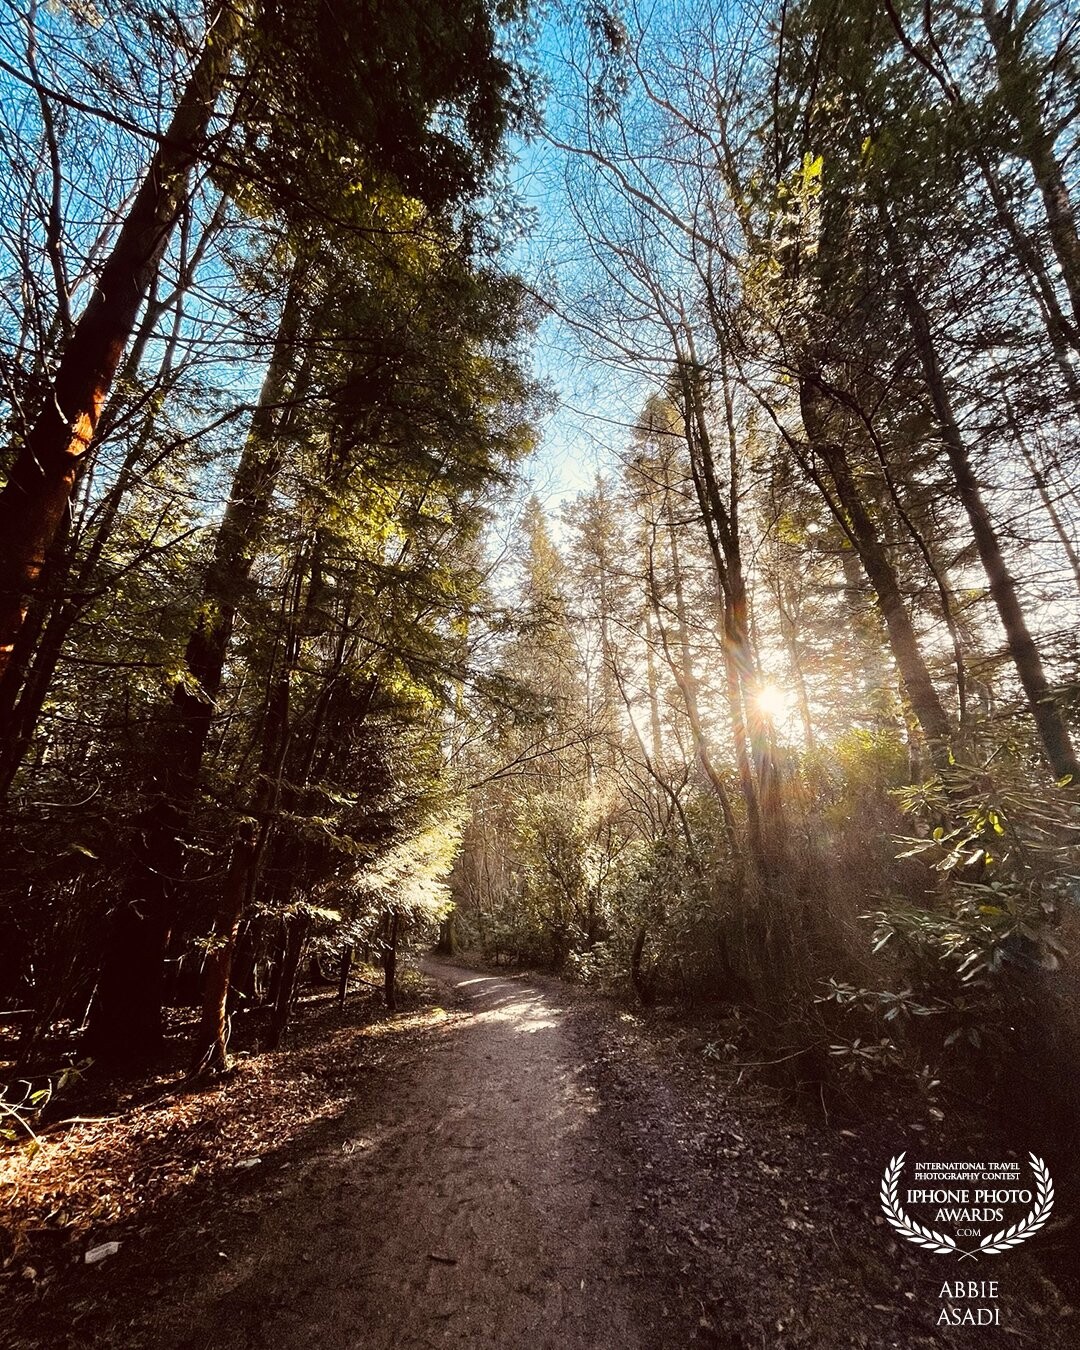 If you go down to the woods today you’re sure to find some beautiful sunlight. <br />
<br />
Wonderful walk through the local woods always looking up at the beauty around me.